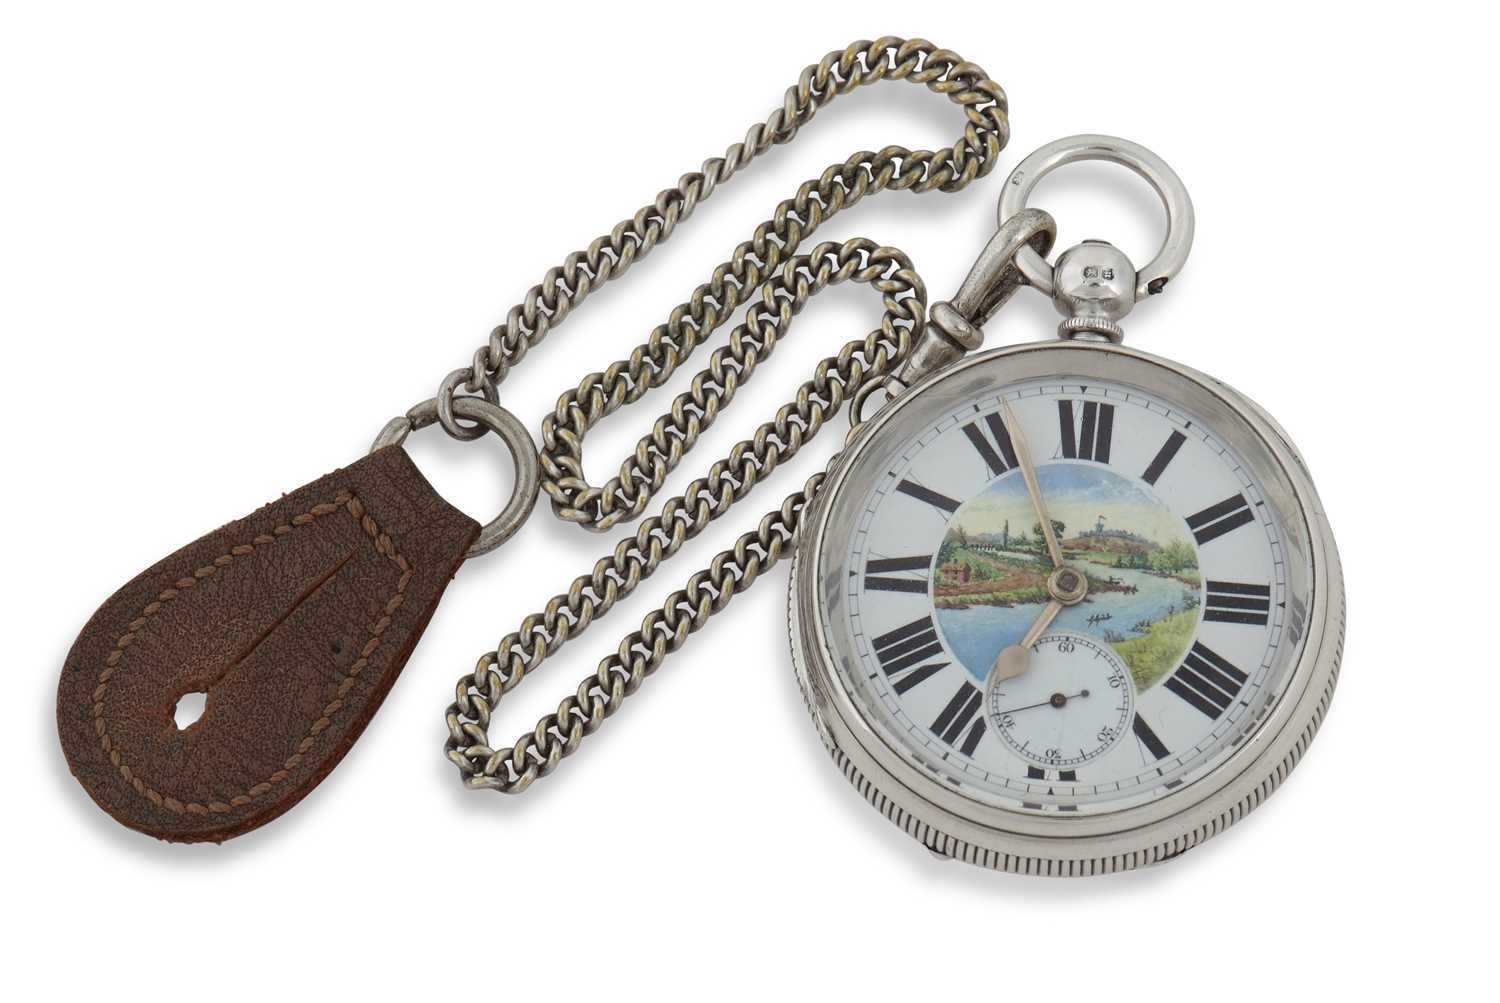 A silver cased Fusee pocket watch and chain, the pocket watch is hallmarked for Chester 1895 and